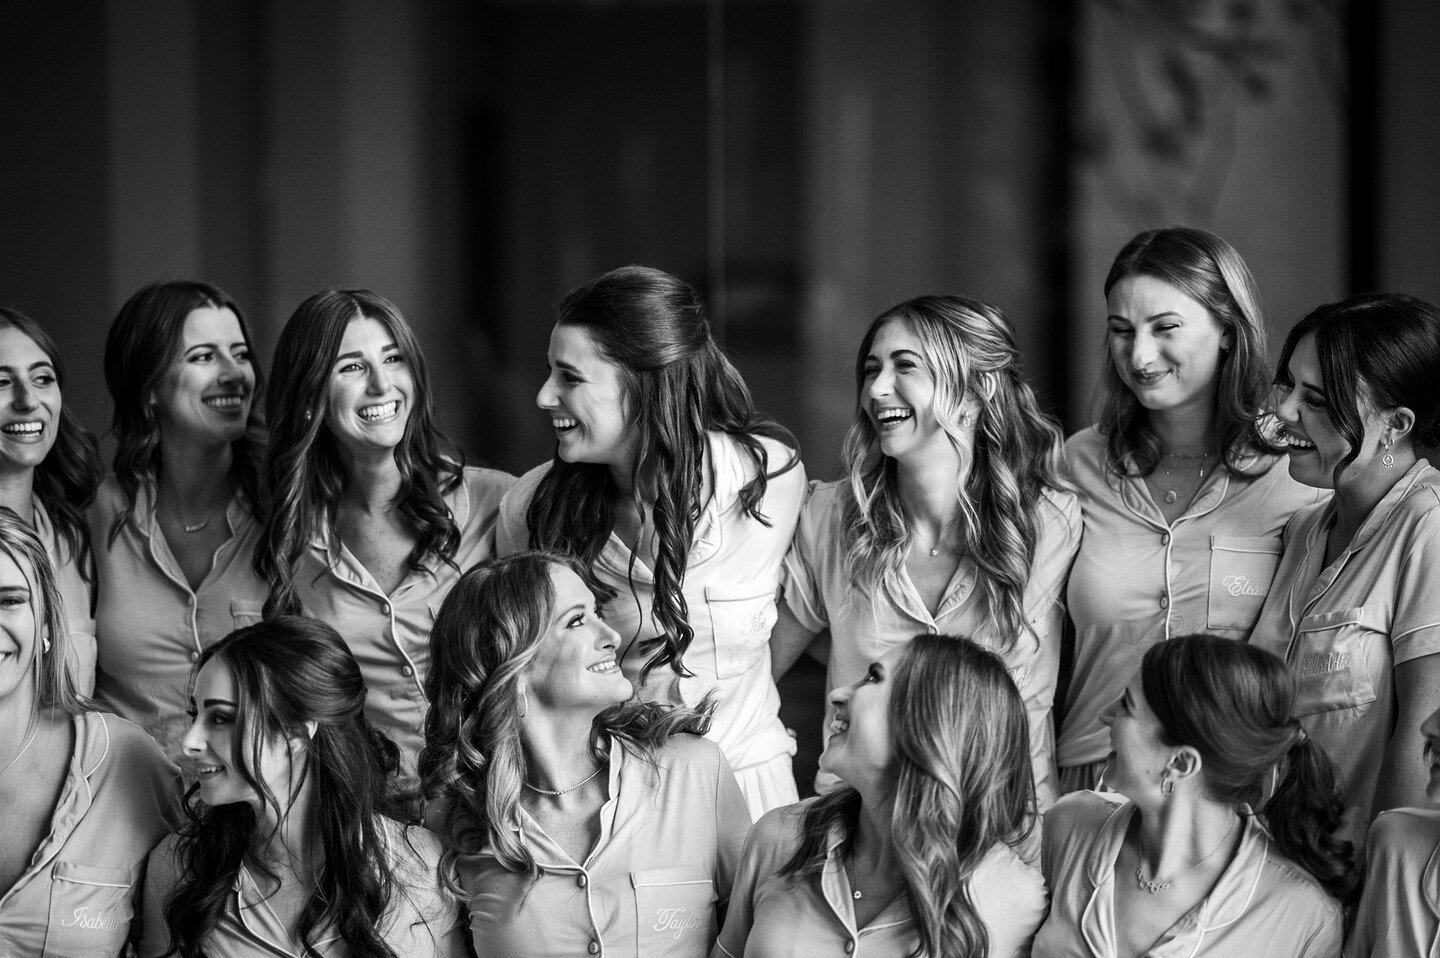 Getting ready together on the bride&rsquo;s special day is a such an exciting moment and we love to capture all of the fun! 🌟⁠
⁠
Hayley + Jared by Chris⁠
⁠
@grayhouseeventsatelier⁠
@postoakuptown⁠
@pixsterphotobooth⁠
@cdnbridal⁠
@sageandseaink ⁠
@su